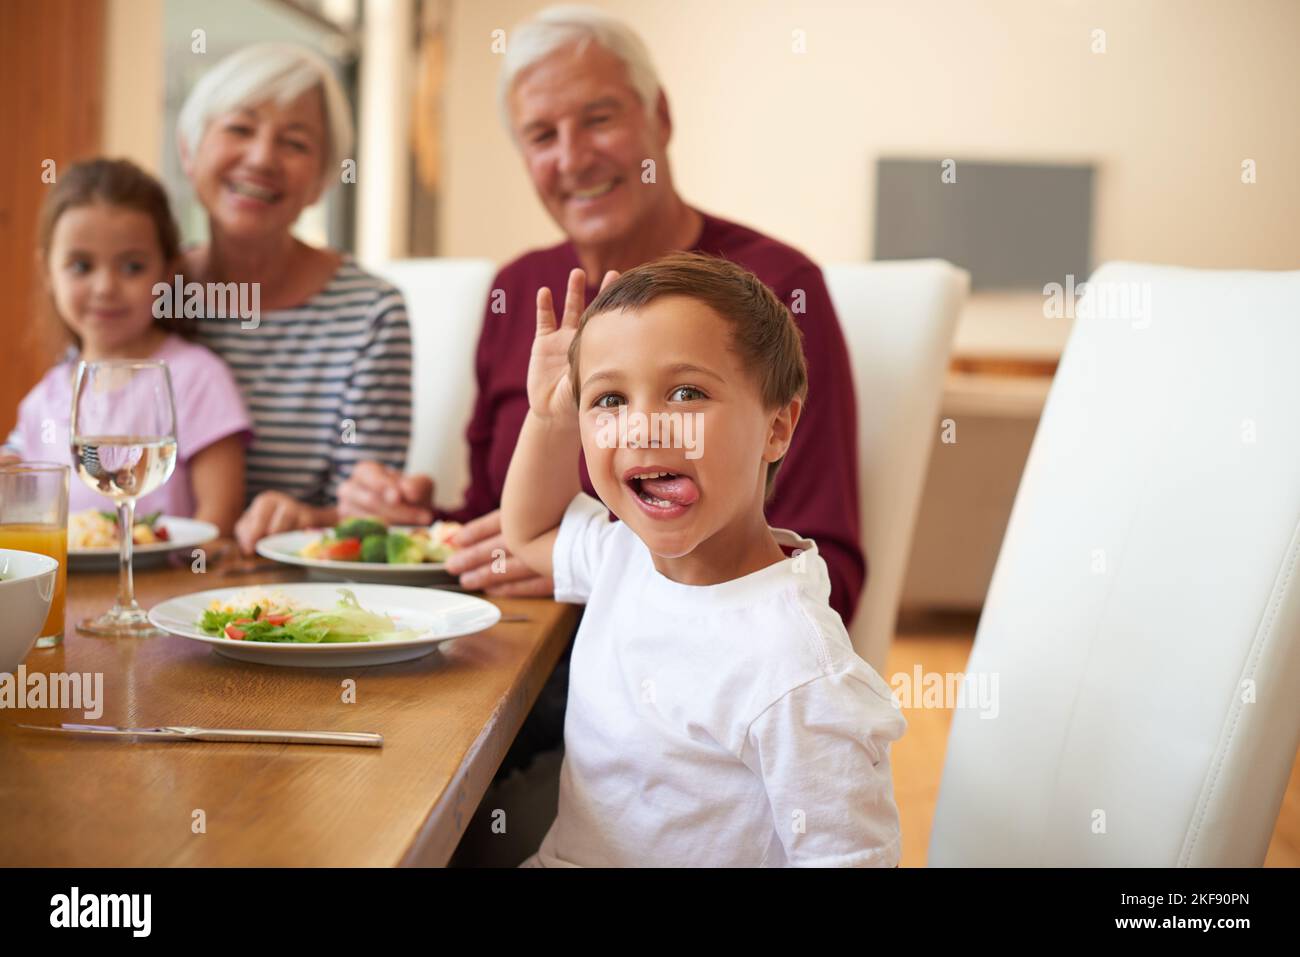 That was D-licious. Portrait of a little boy having a meal with his grandparents. Stock Photo